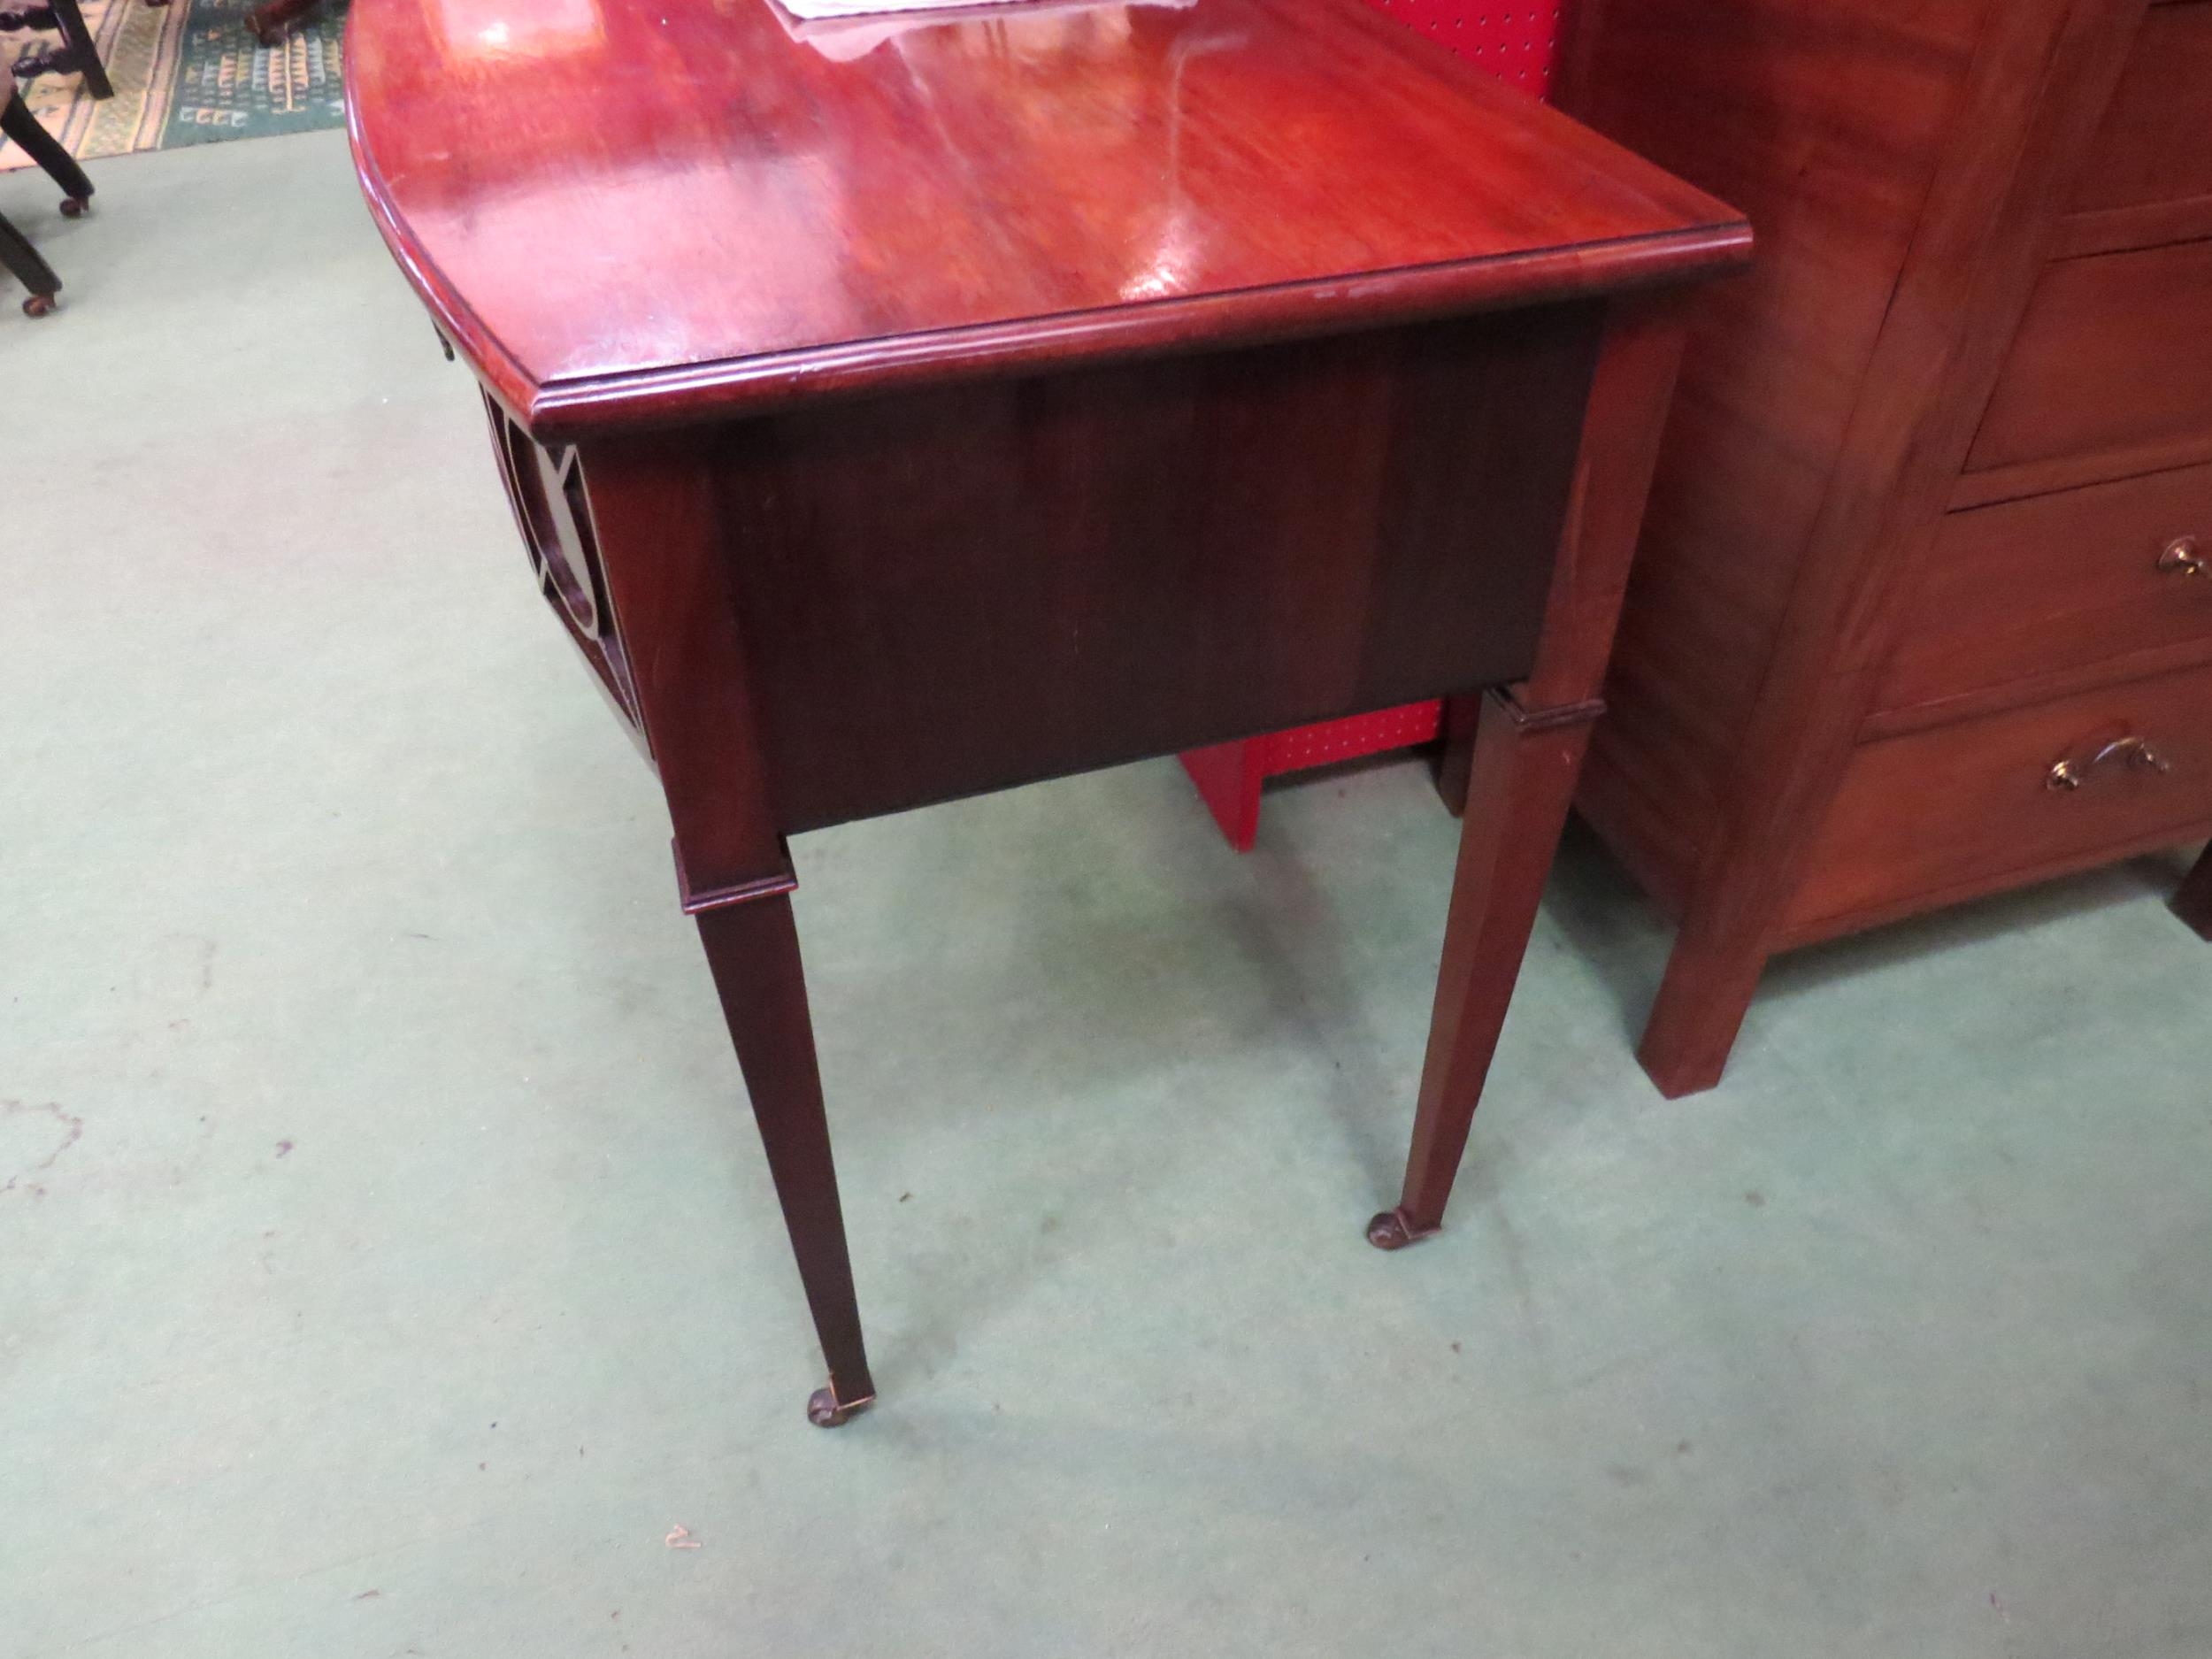 Circa 1860 a flame mahogany bow front side table, the single frieze drawer flanked by moulded panels - Image 2 of 4